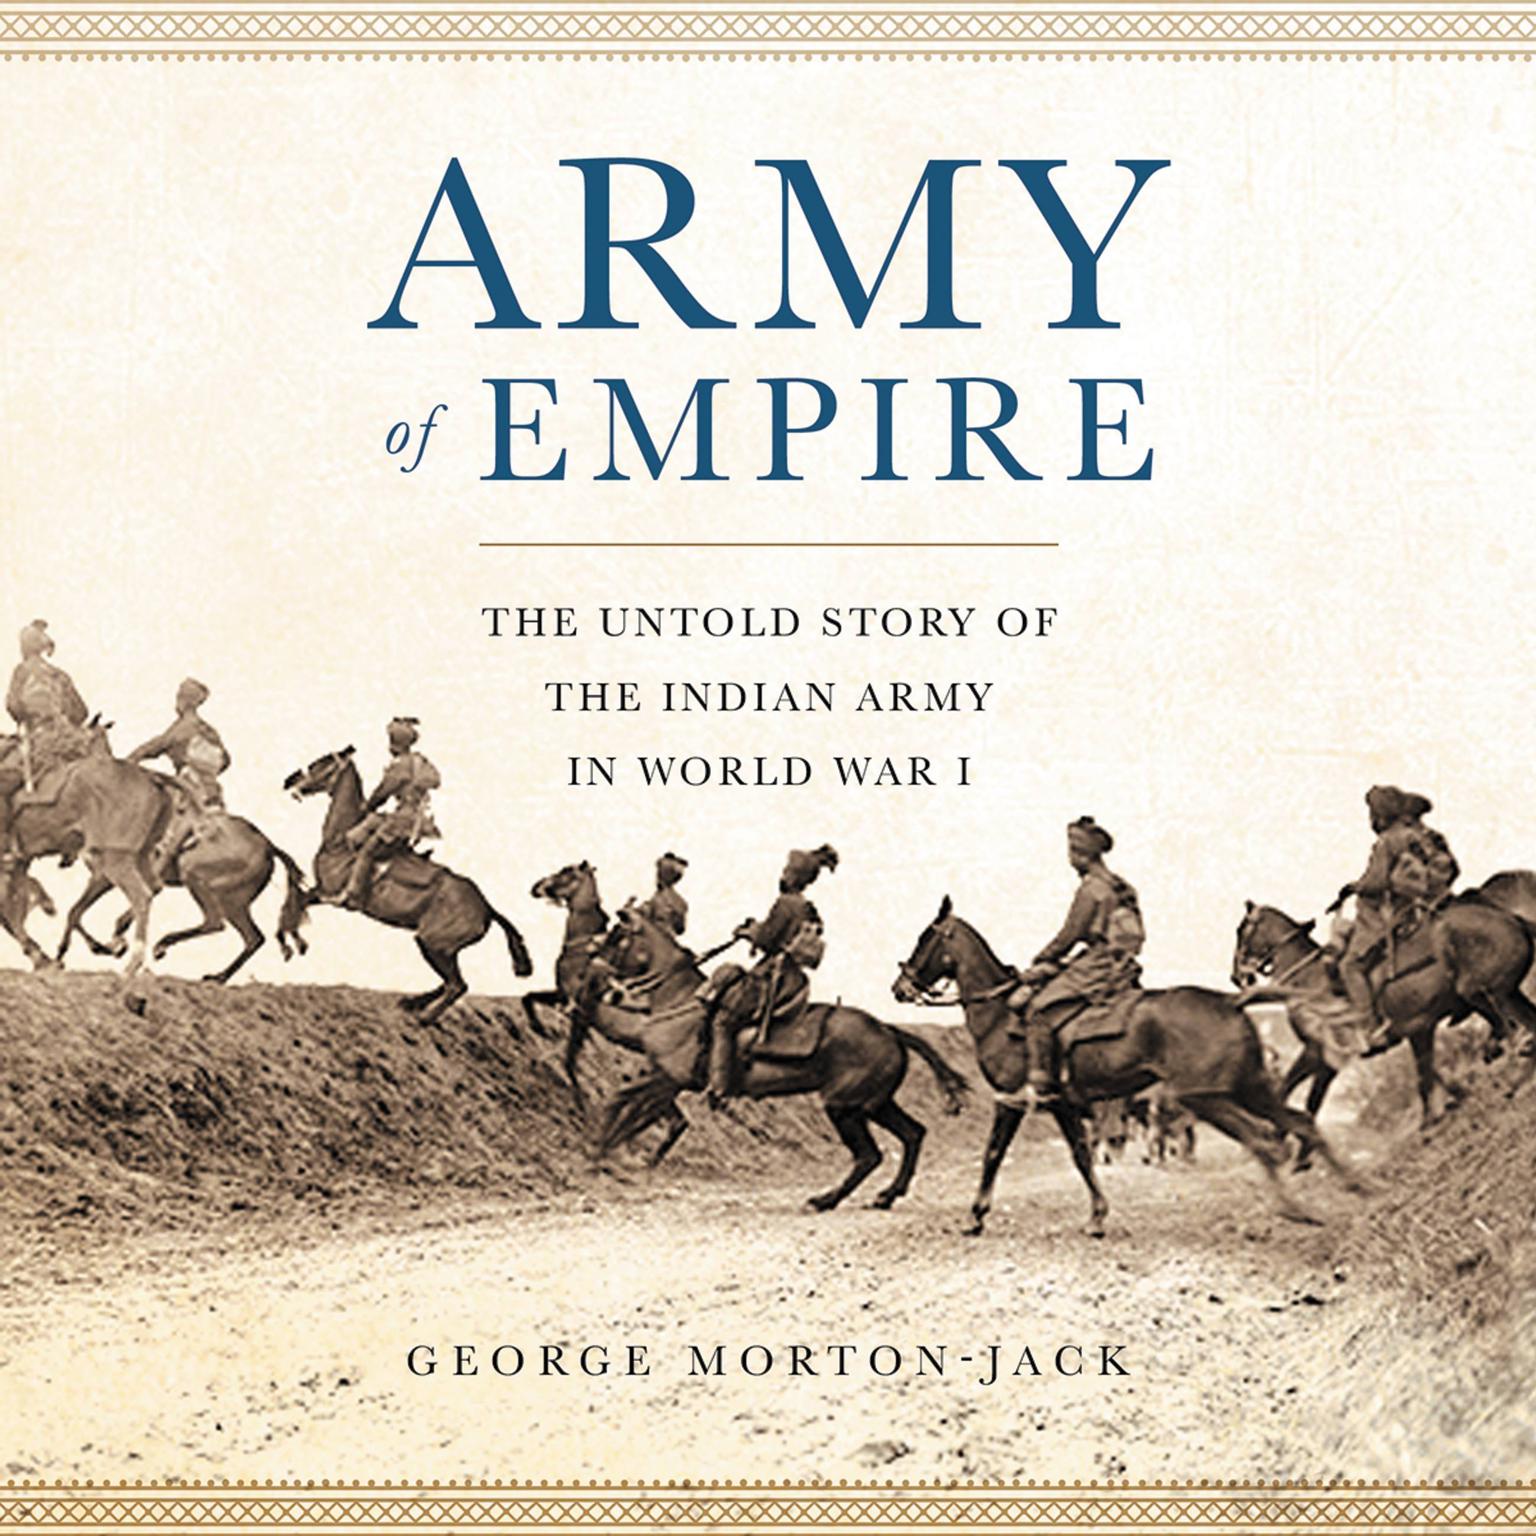 Army of Empire: The Untold Story of the Indian Army in World War I Audiobook, by George Morton-Jack